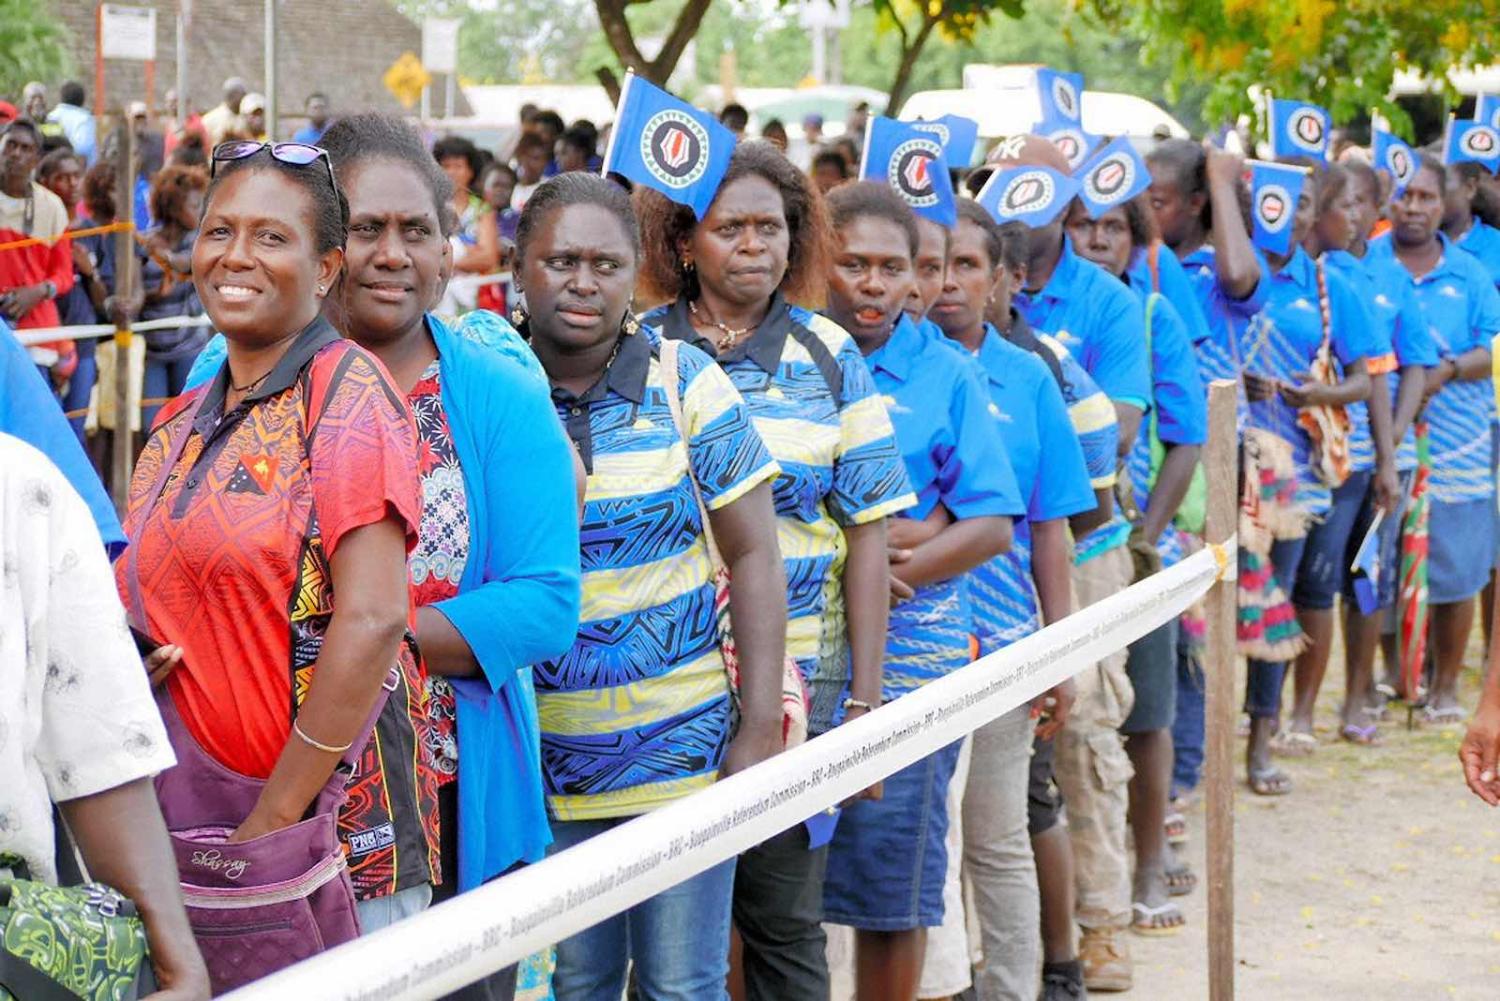 Getting ready to vote during the Bougainville independence referendum in November 2019, Buka (The Asahi Shimbun via Getty Images)